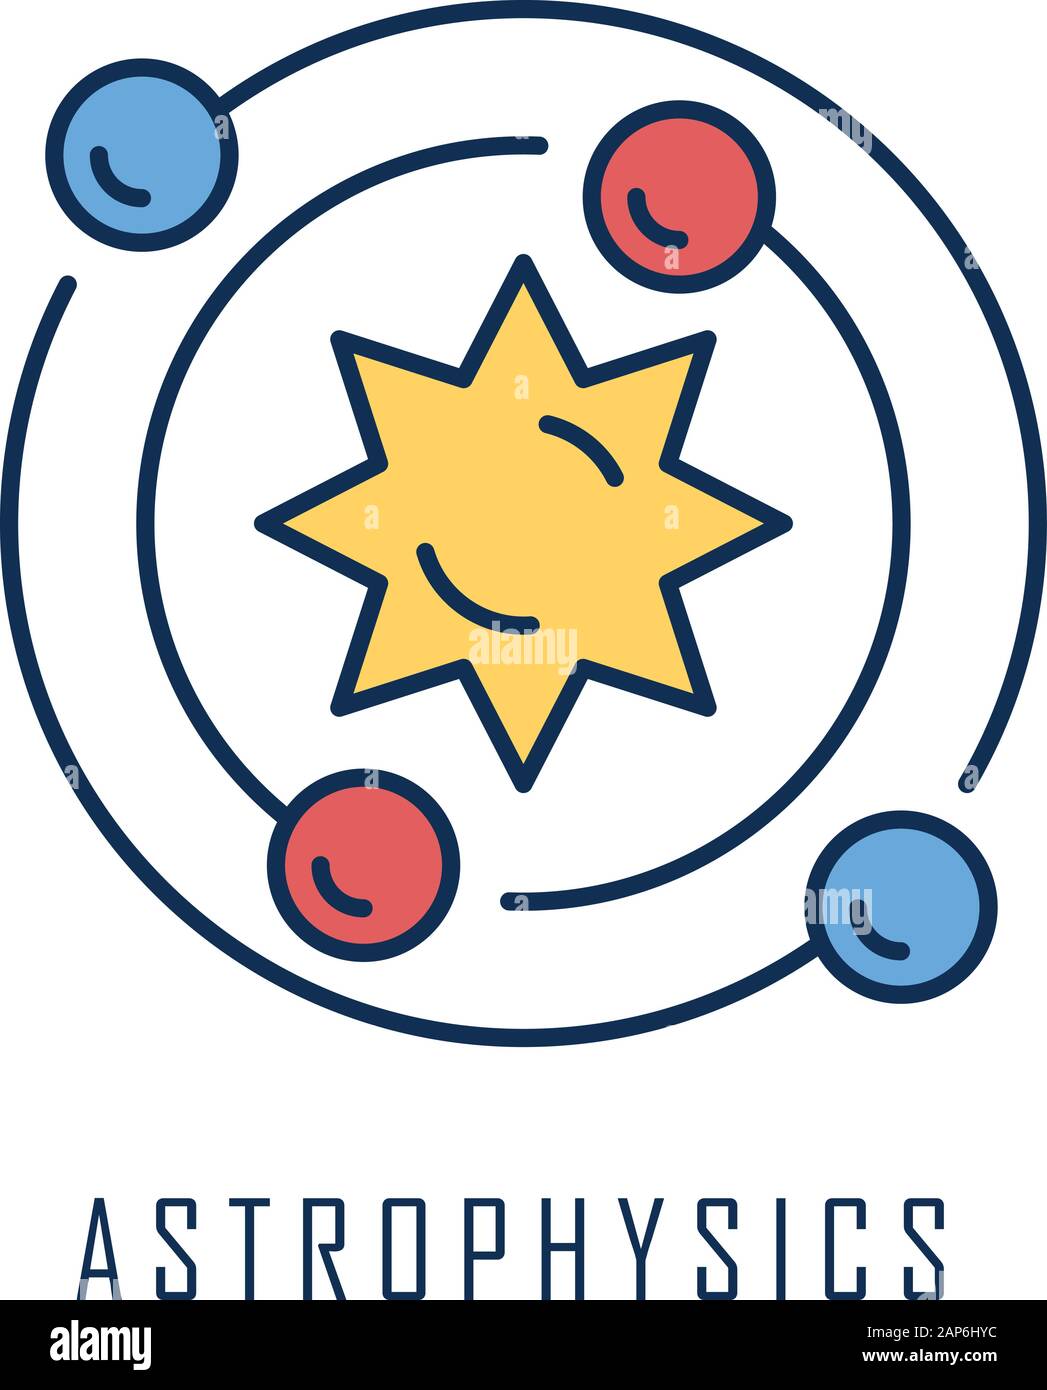 Astrophysics color icon. Astronomy branch. Study of universe, stars, planets, galaxies. Astrophysical discoveries. Cosmology, Solar System science. Sp Stock Vector